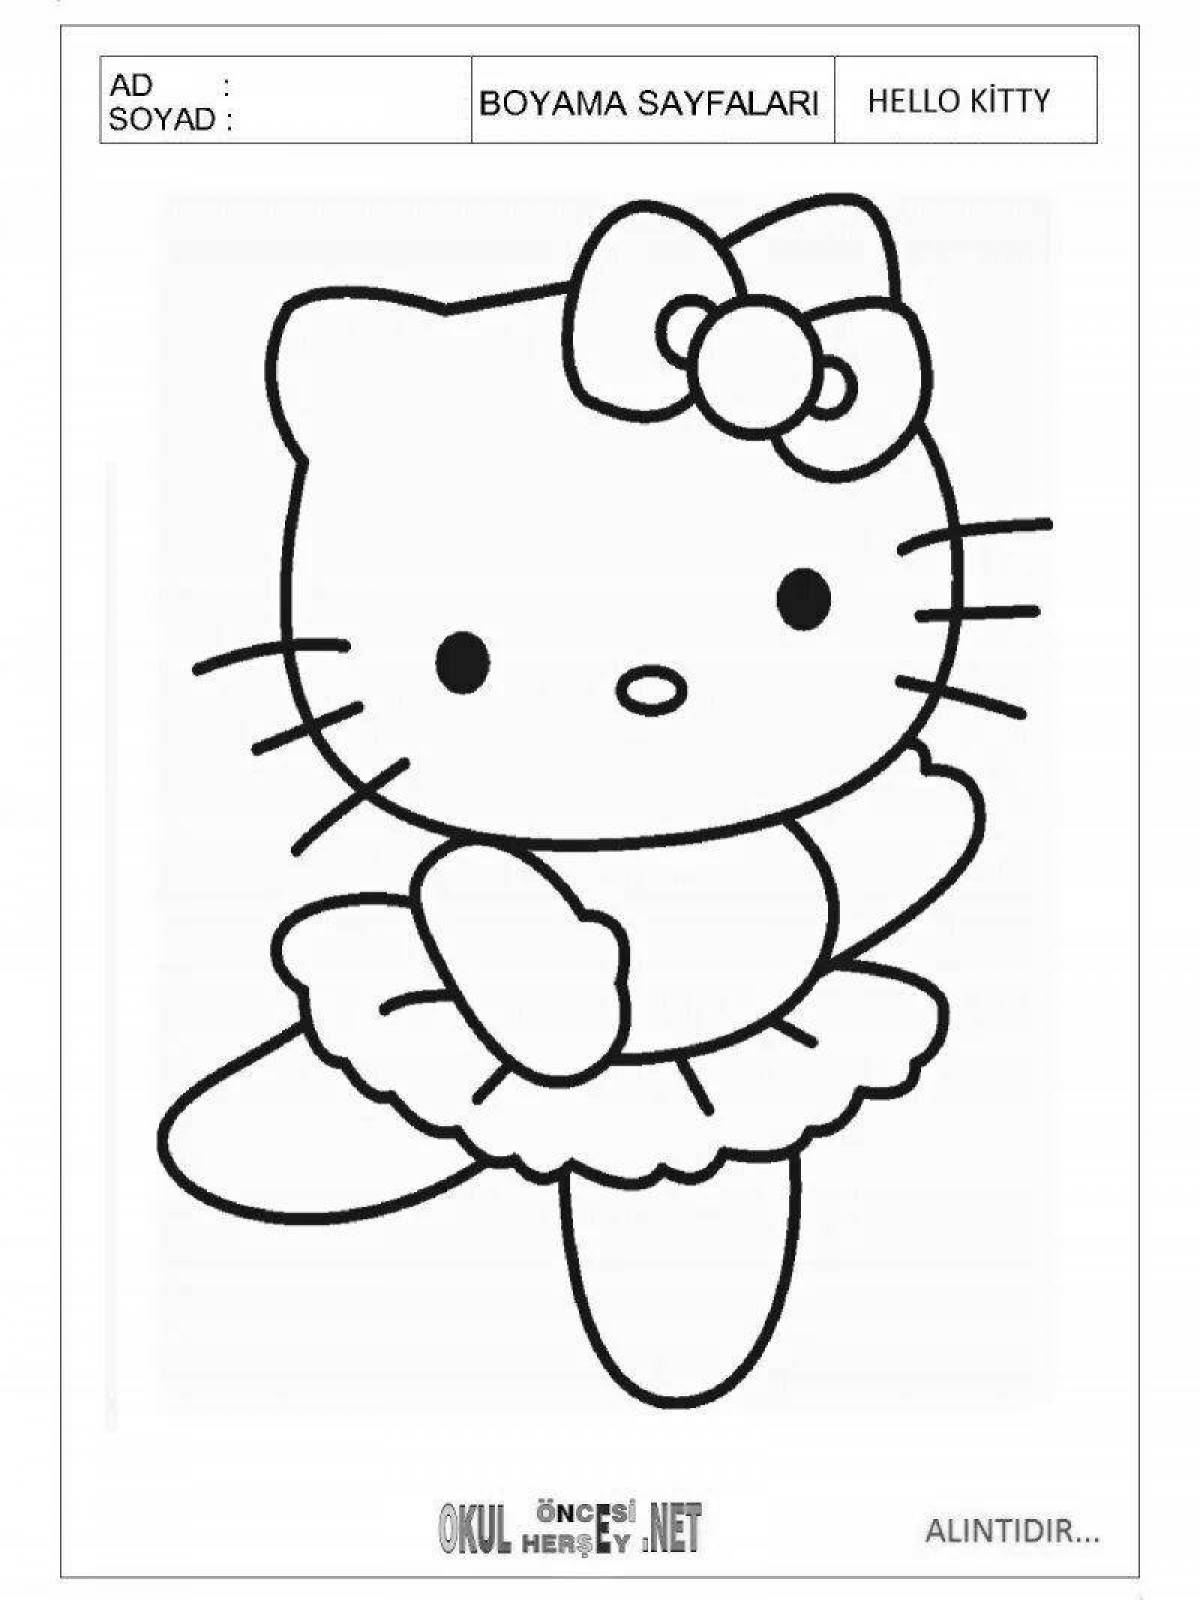 Colorful and whimsical aster kitty coloring book